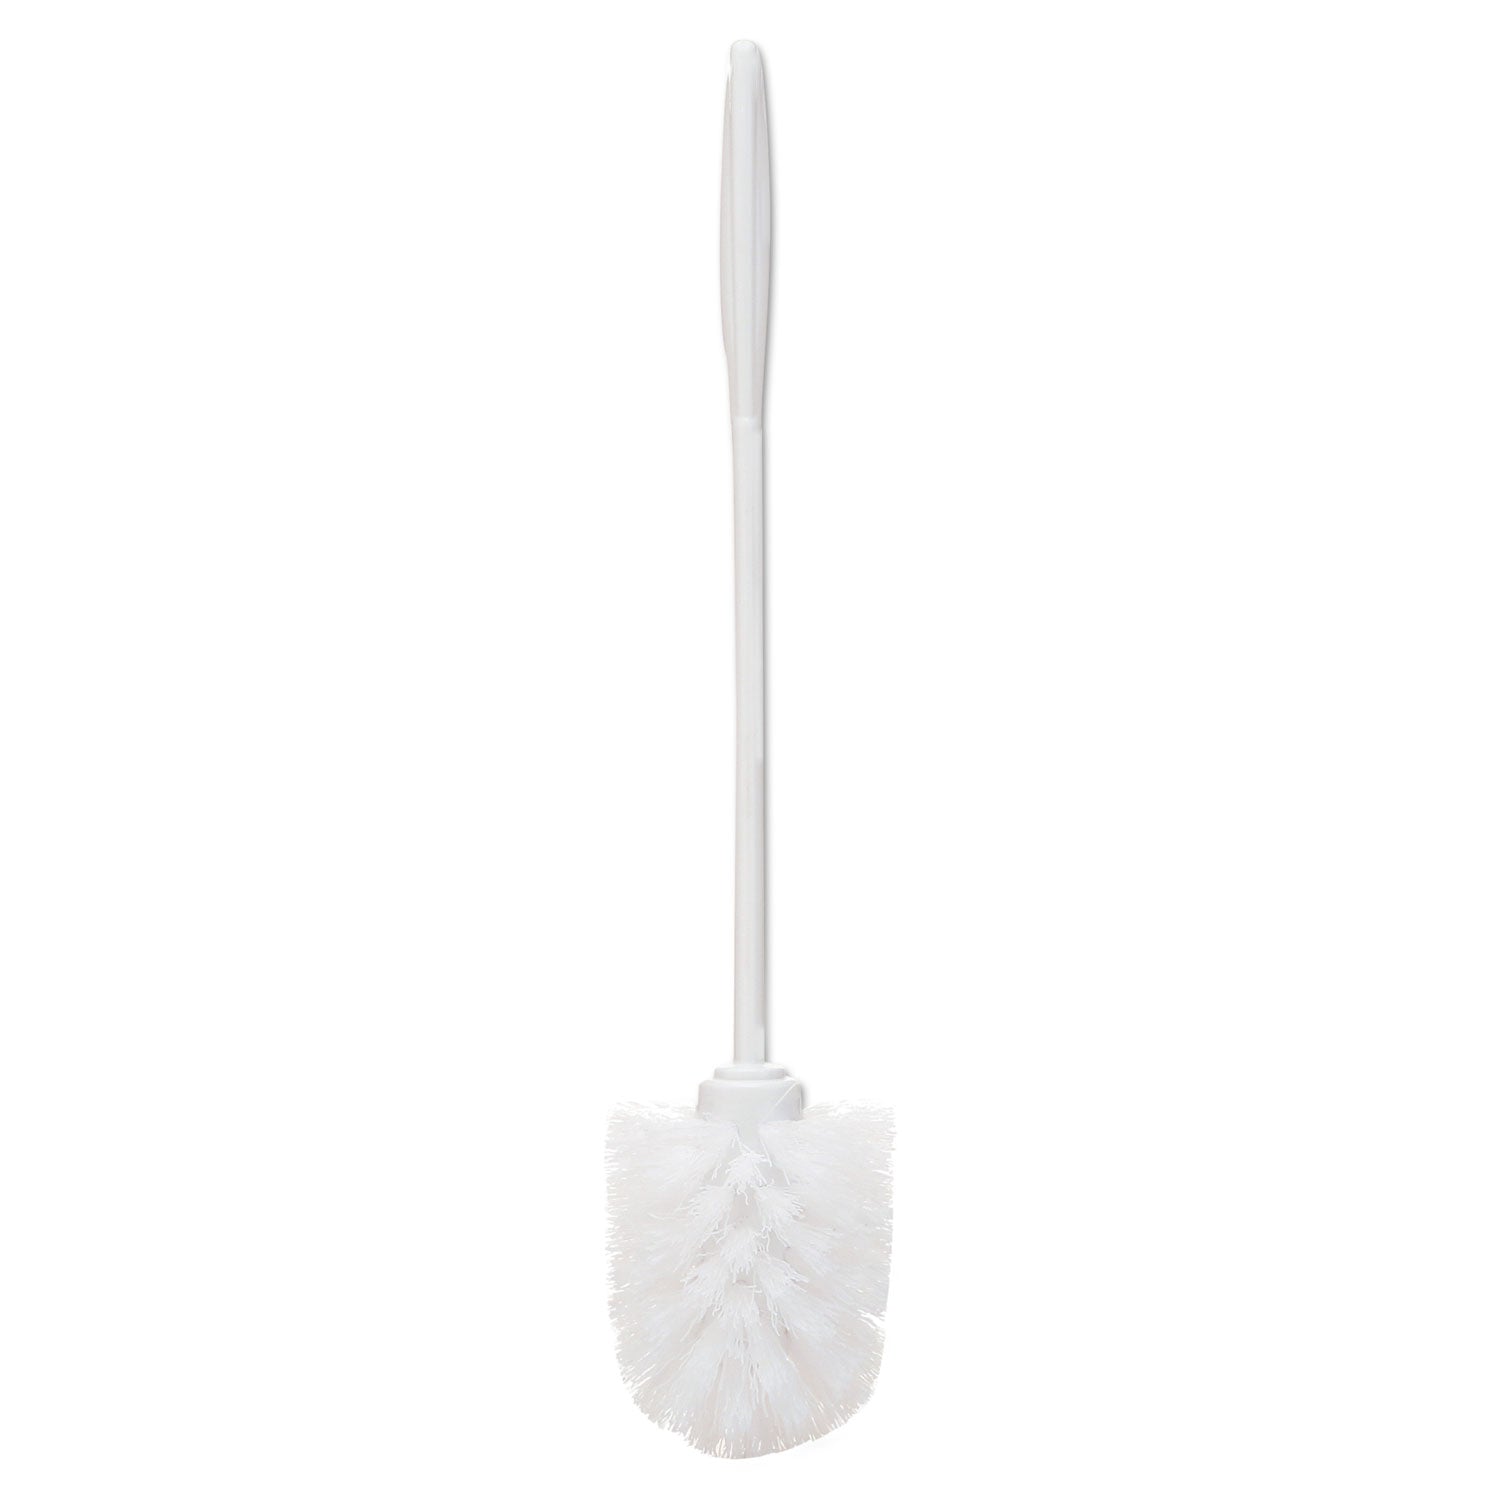 commercial-gradetoilet-bowl-brush-10-handle-white-24-carton_rcp631000wect - 1